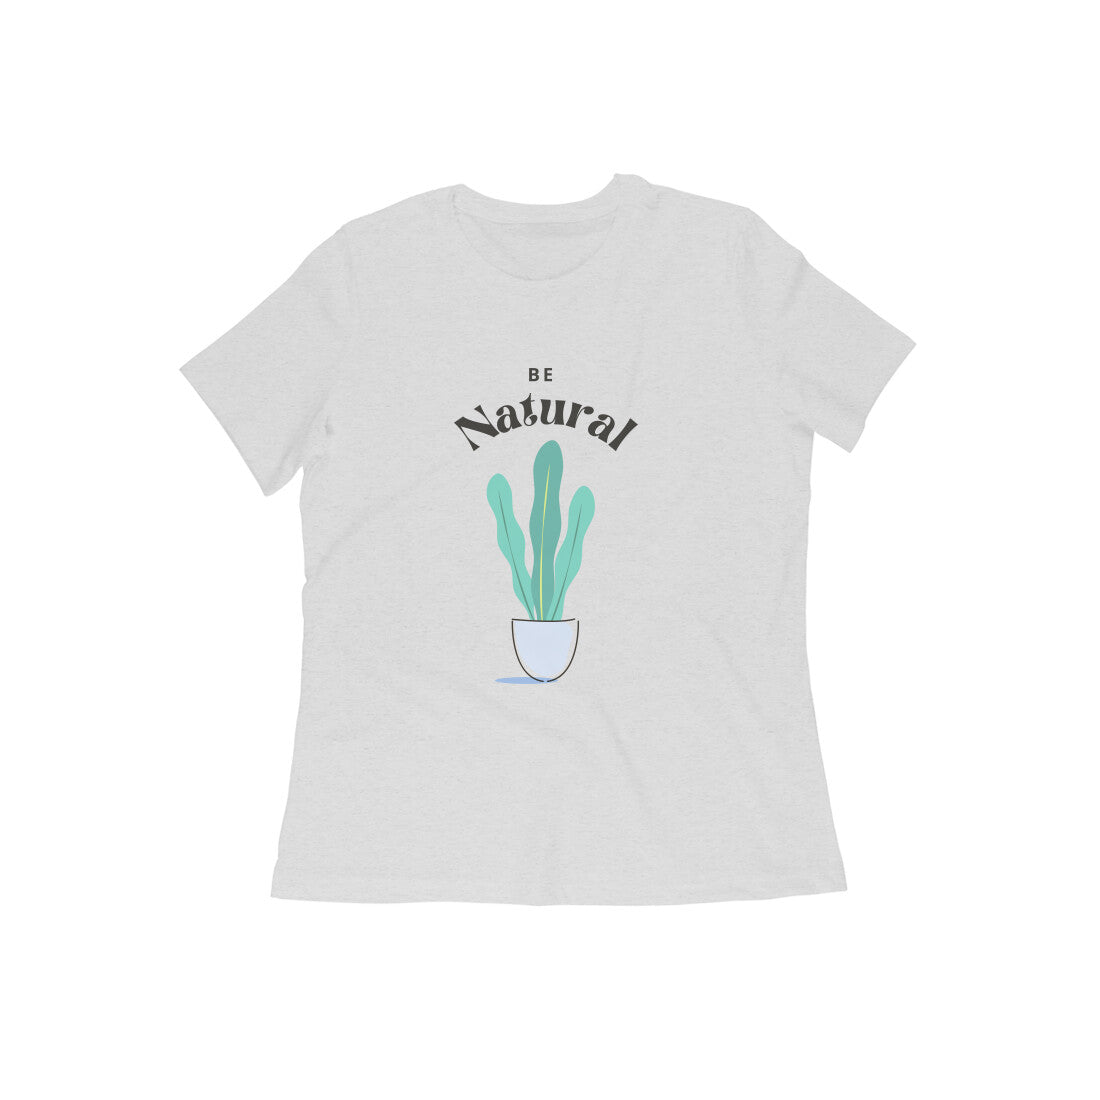 Be Natural T-shirt for women